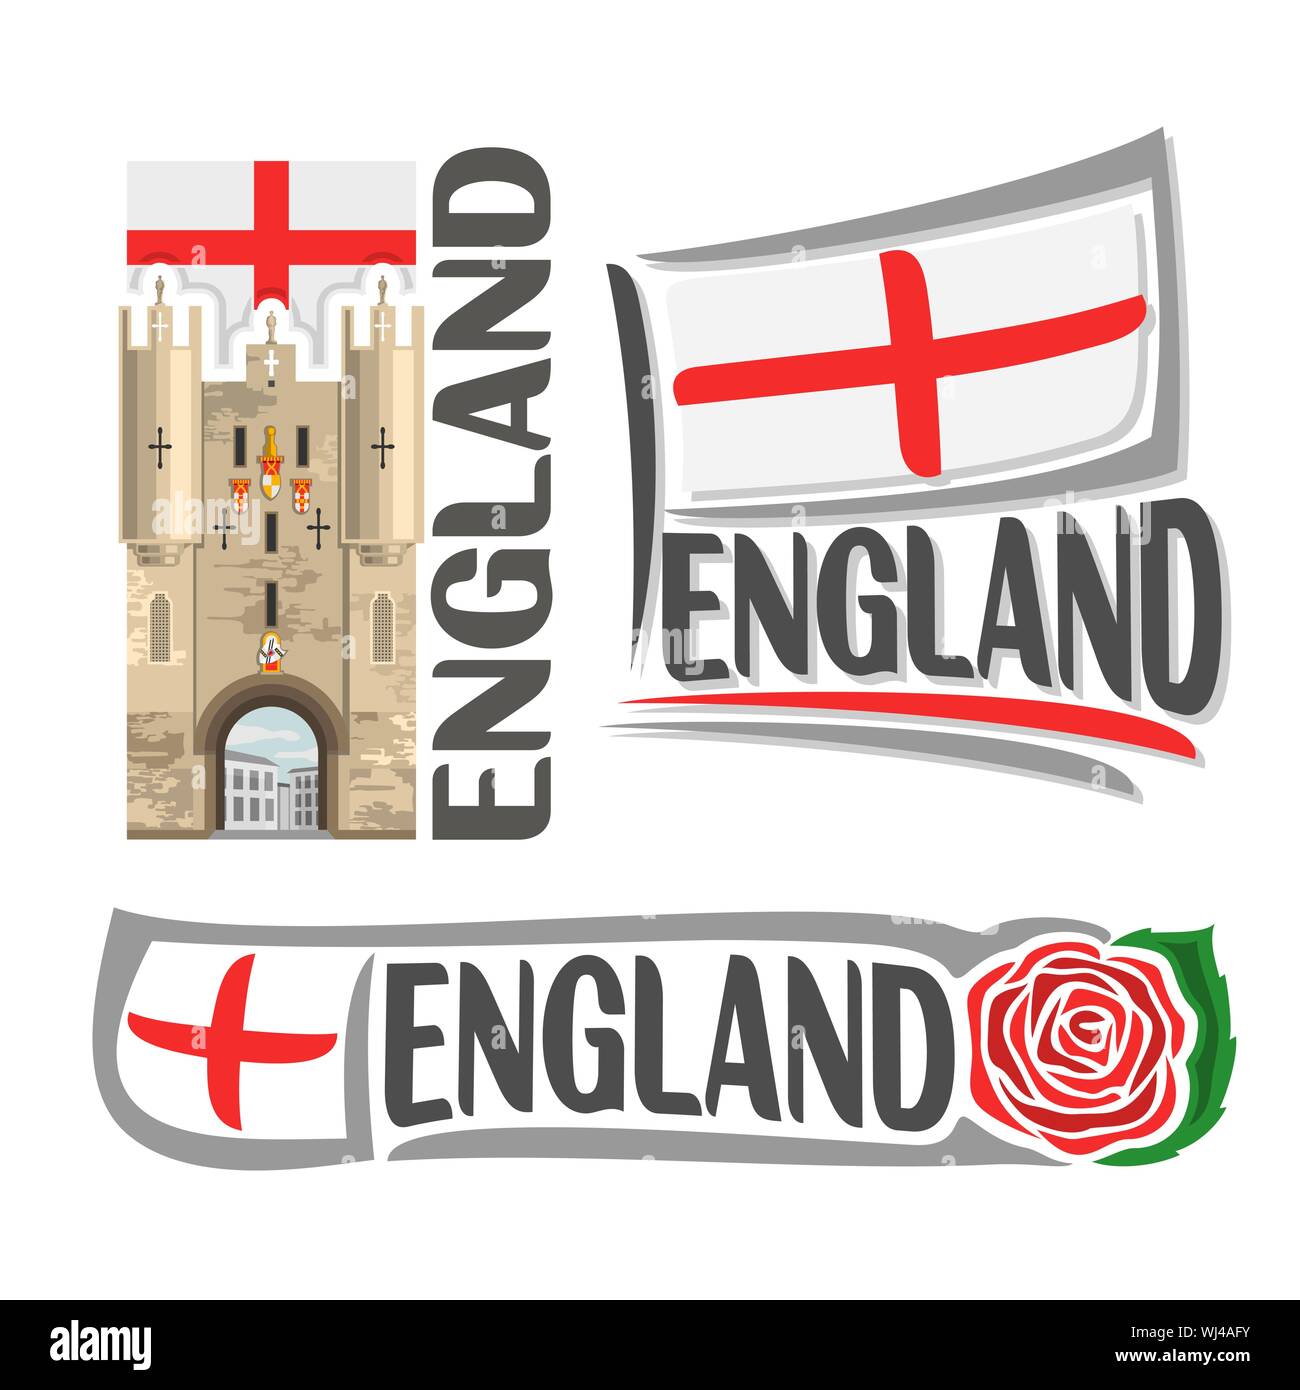 Vector logo for England, 3 isolated illustrations: Monkgate Monk Bar of York City Walls on background national state flag, symbol of England architect Stock Vector